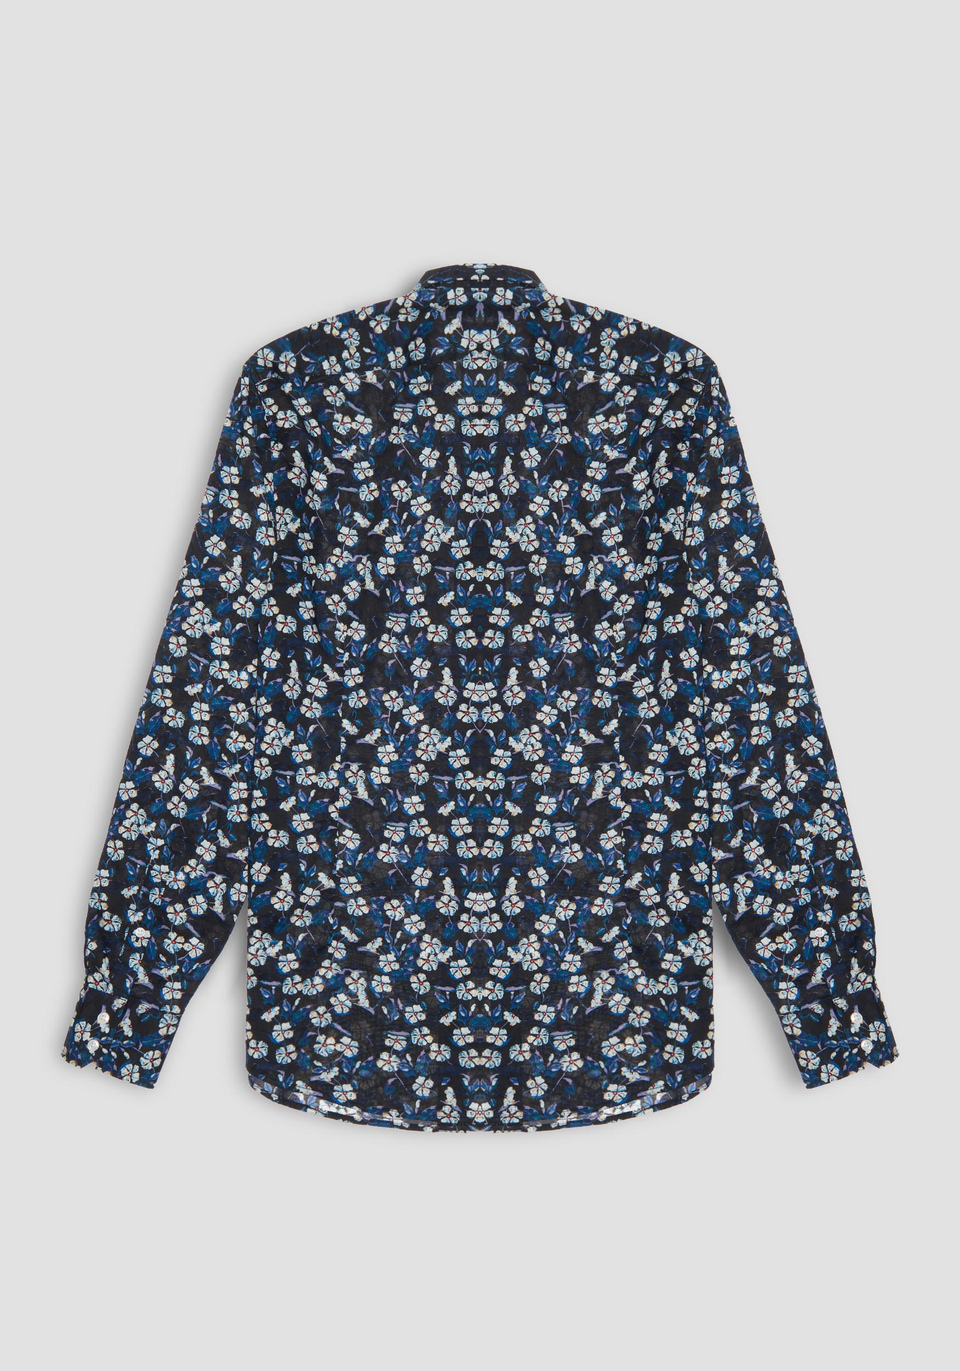 SLIM-FIT “NAPOLI” SHIRT IN 100% COTTON WITH AN ALL-OVER FLOWER PRINT PATTERN - Antony Morato Online Shop